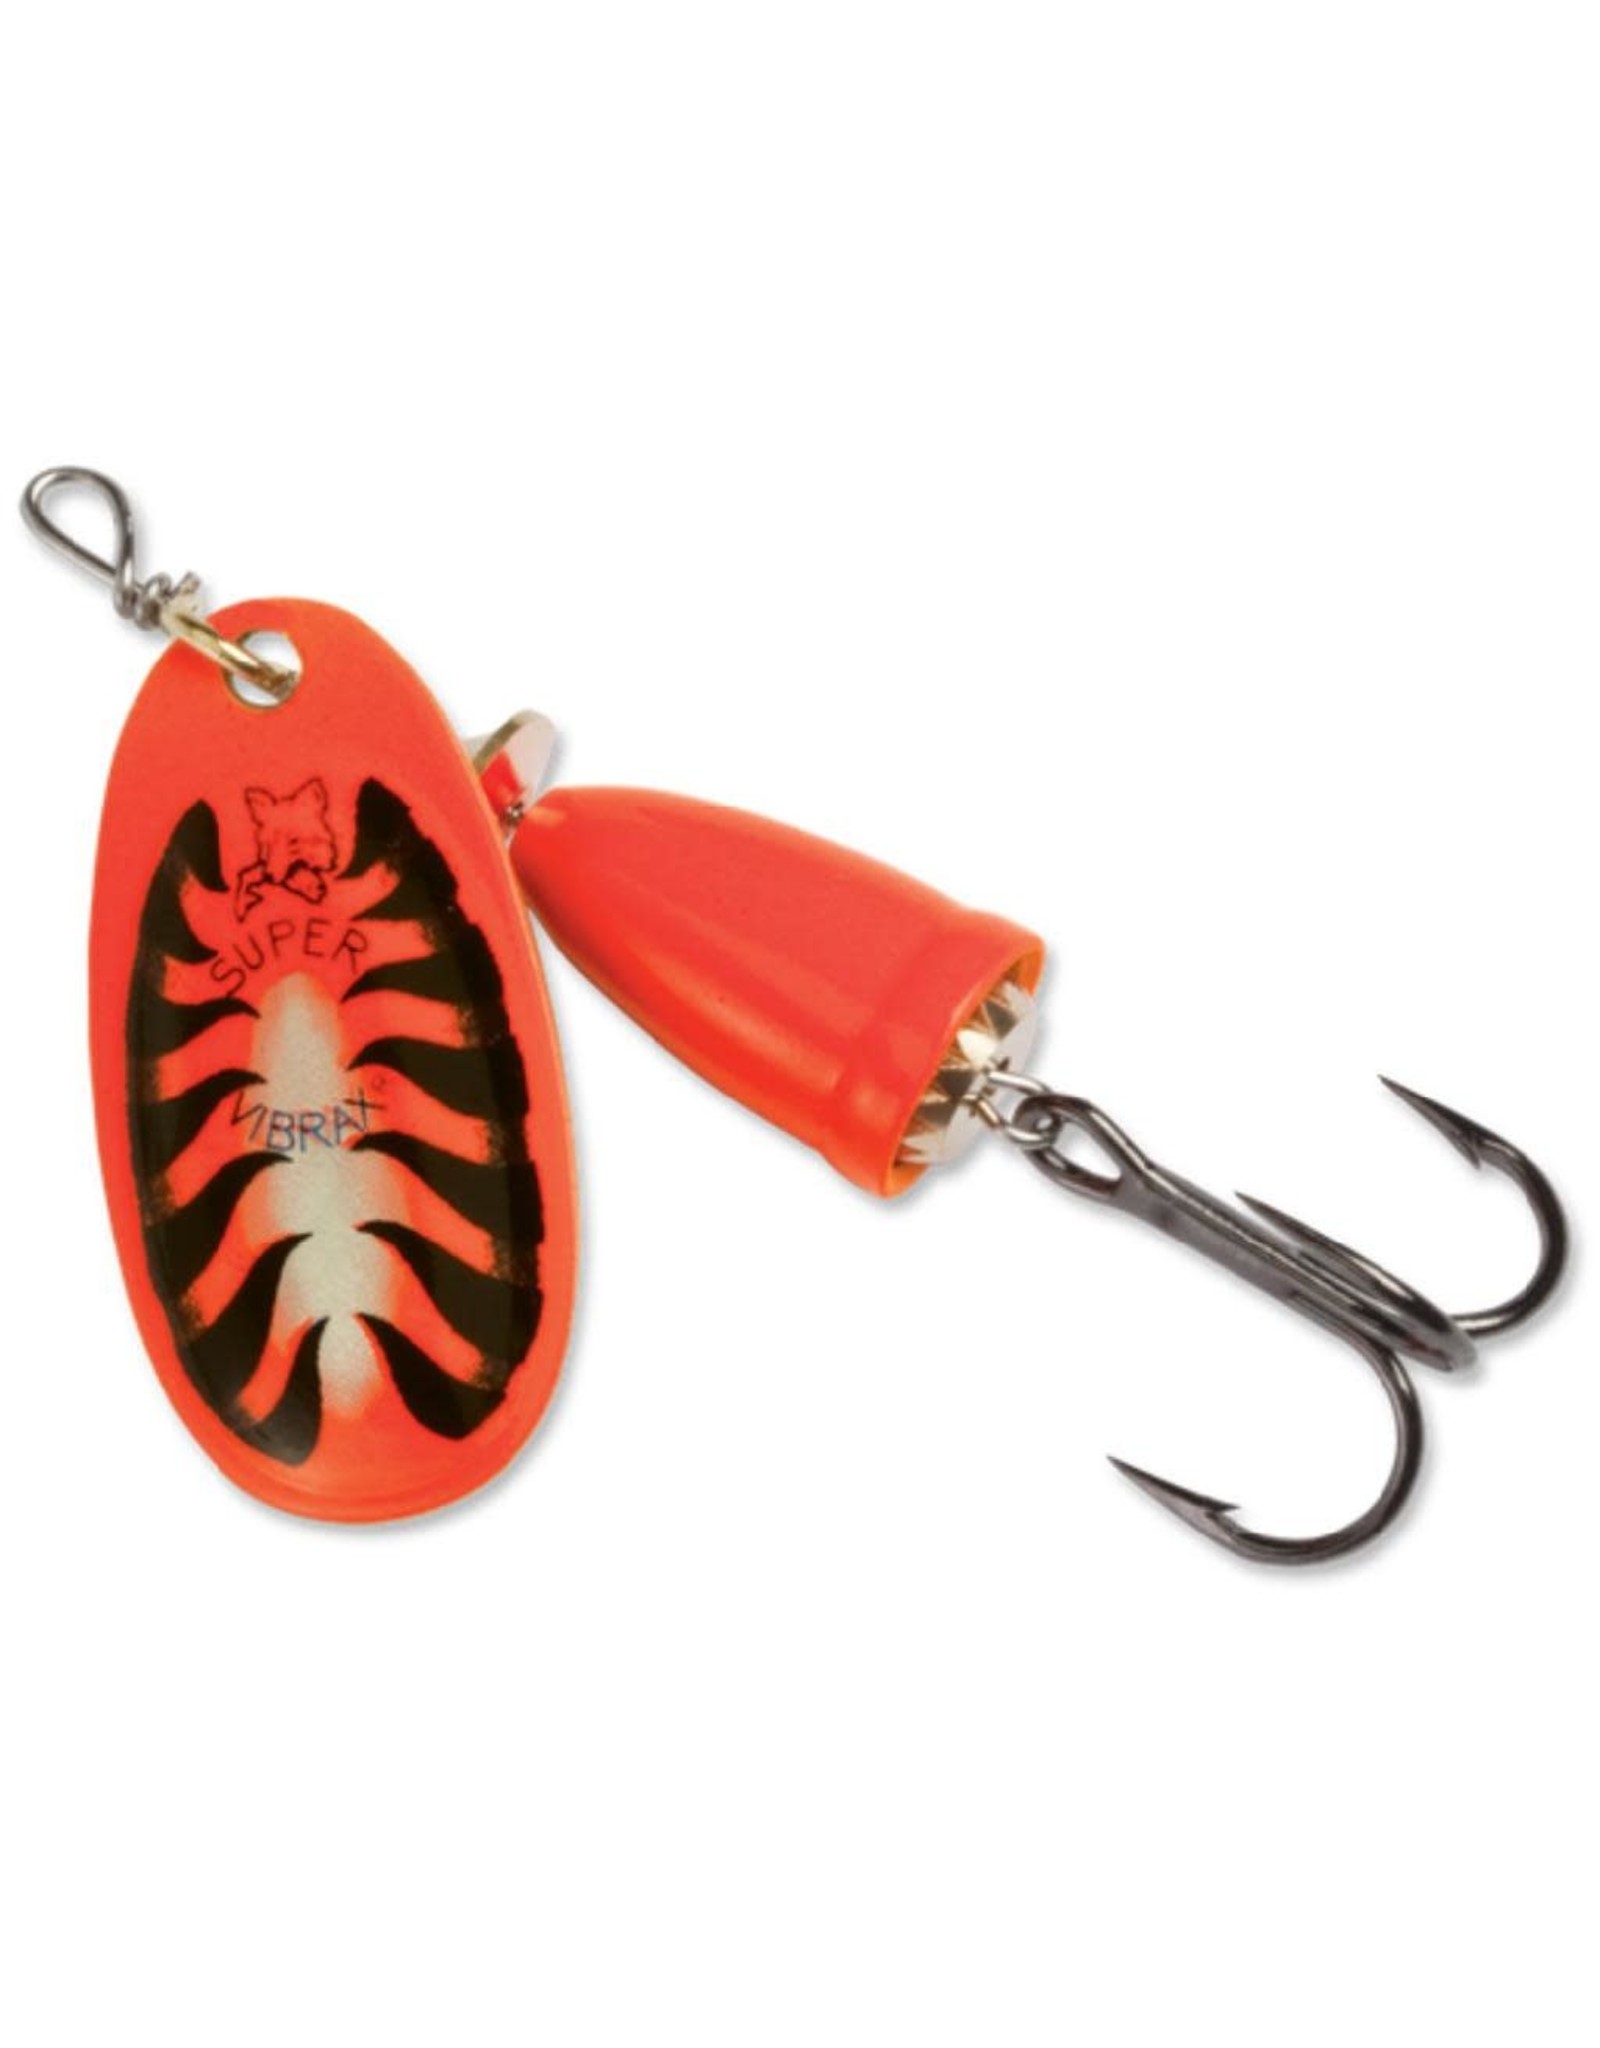 Vibrax Blue Fox 7/16 oz - Red Tiger Painted - Larry's Sporting Goods